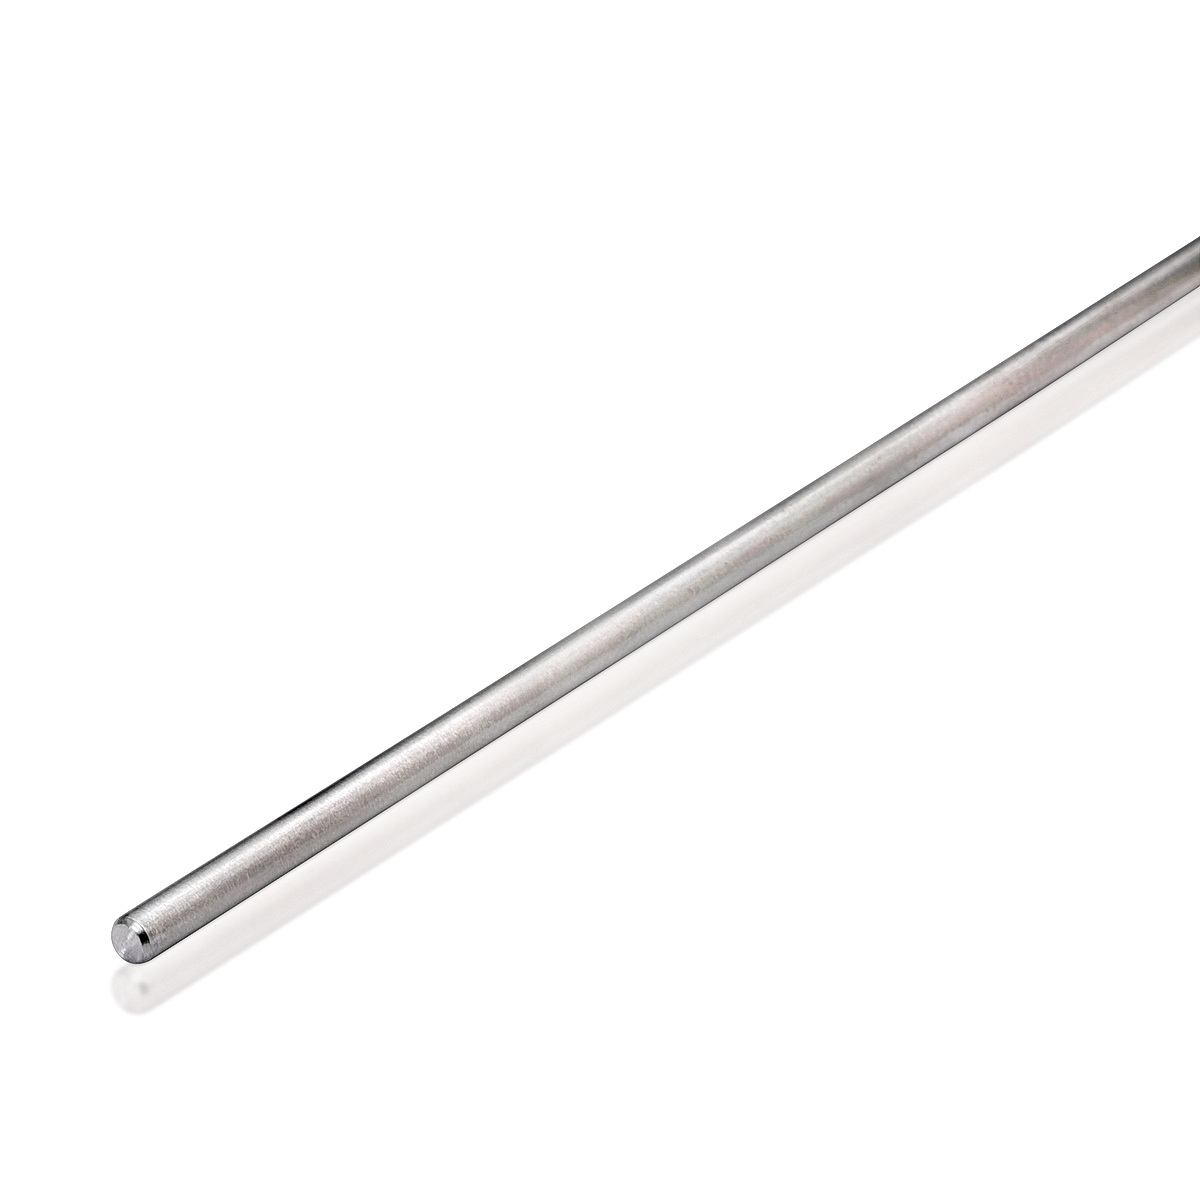 1/4'' Stainless Steel Rod (Length: 4' 11'')